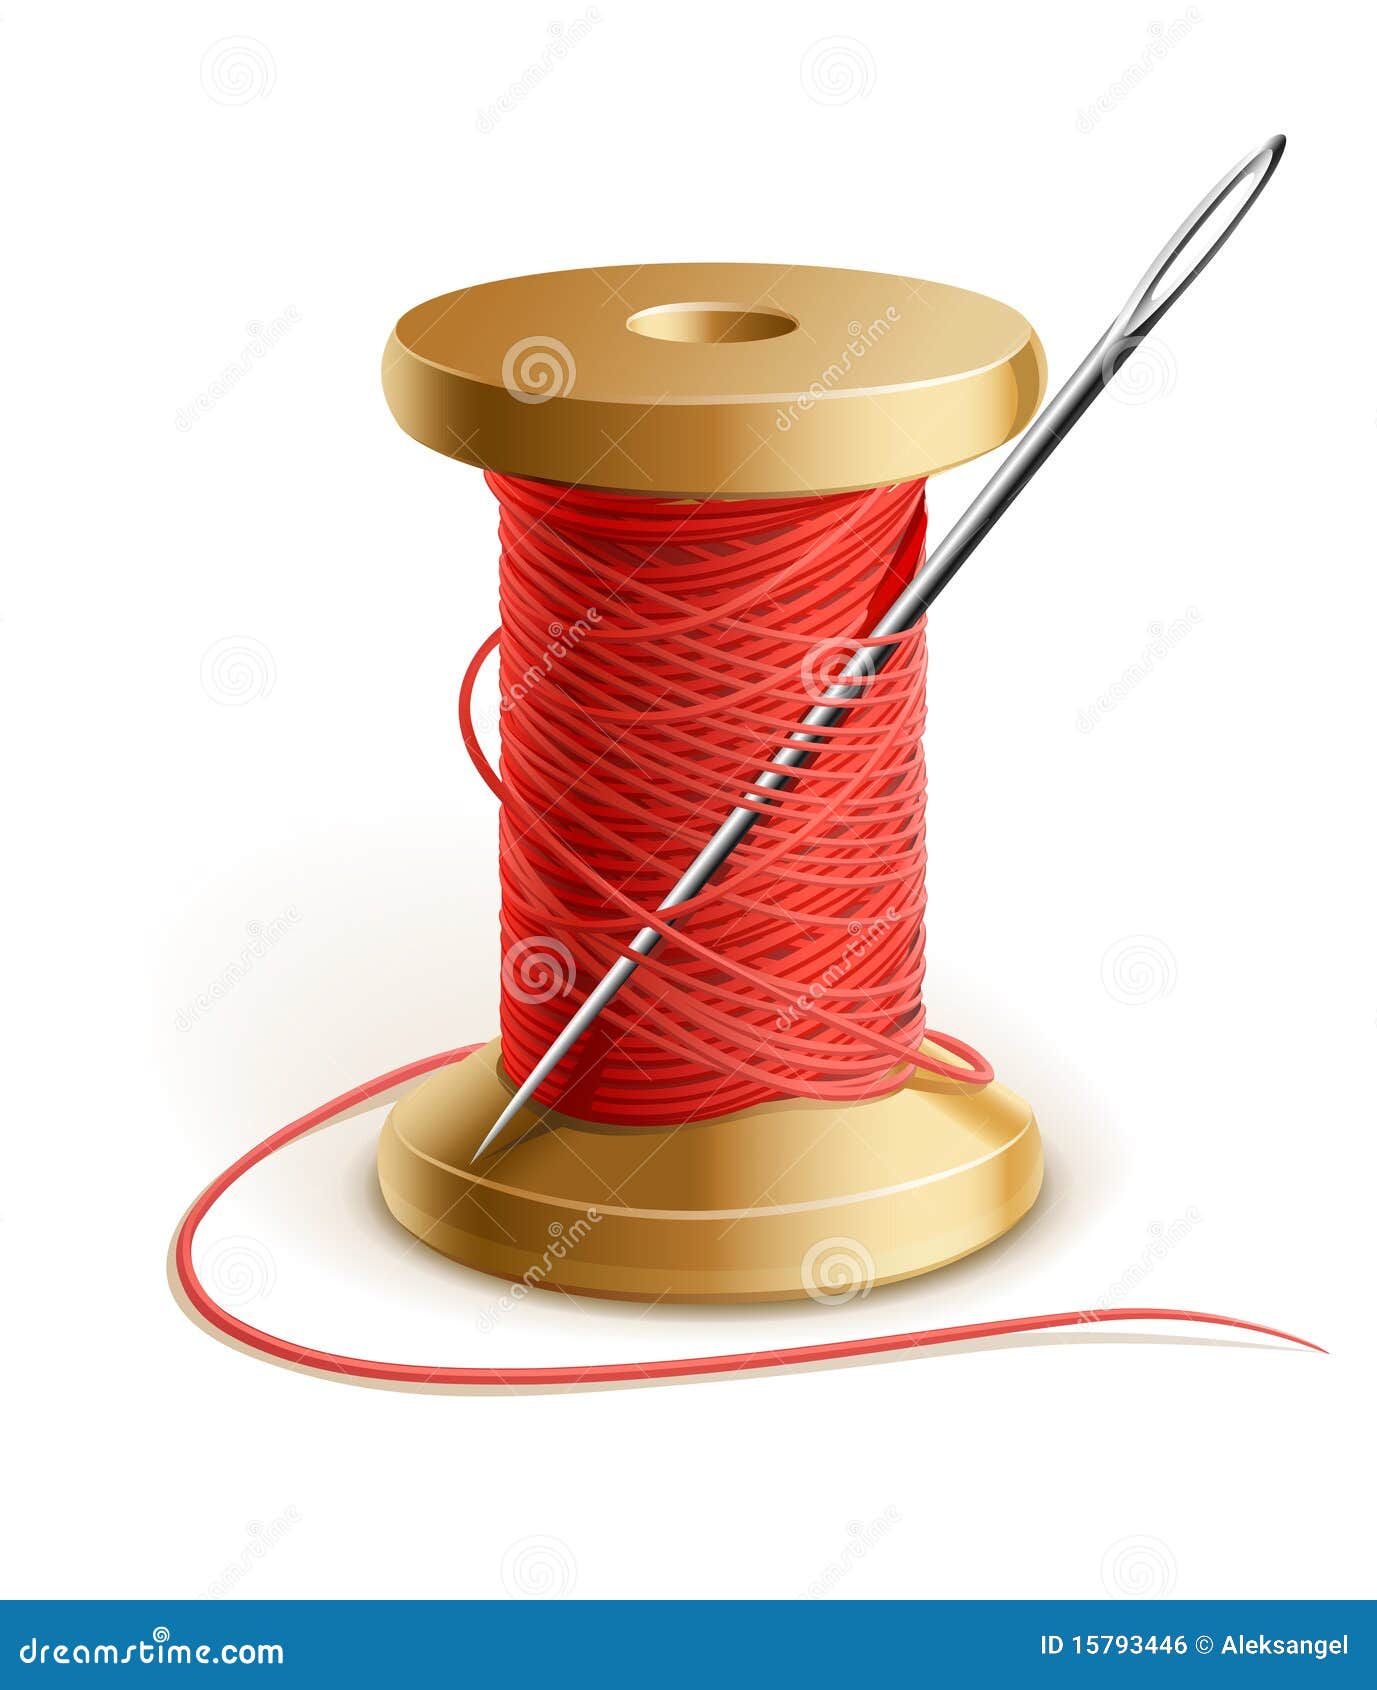 reel with thread and needle